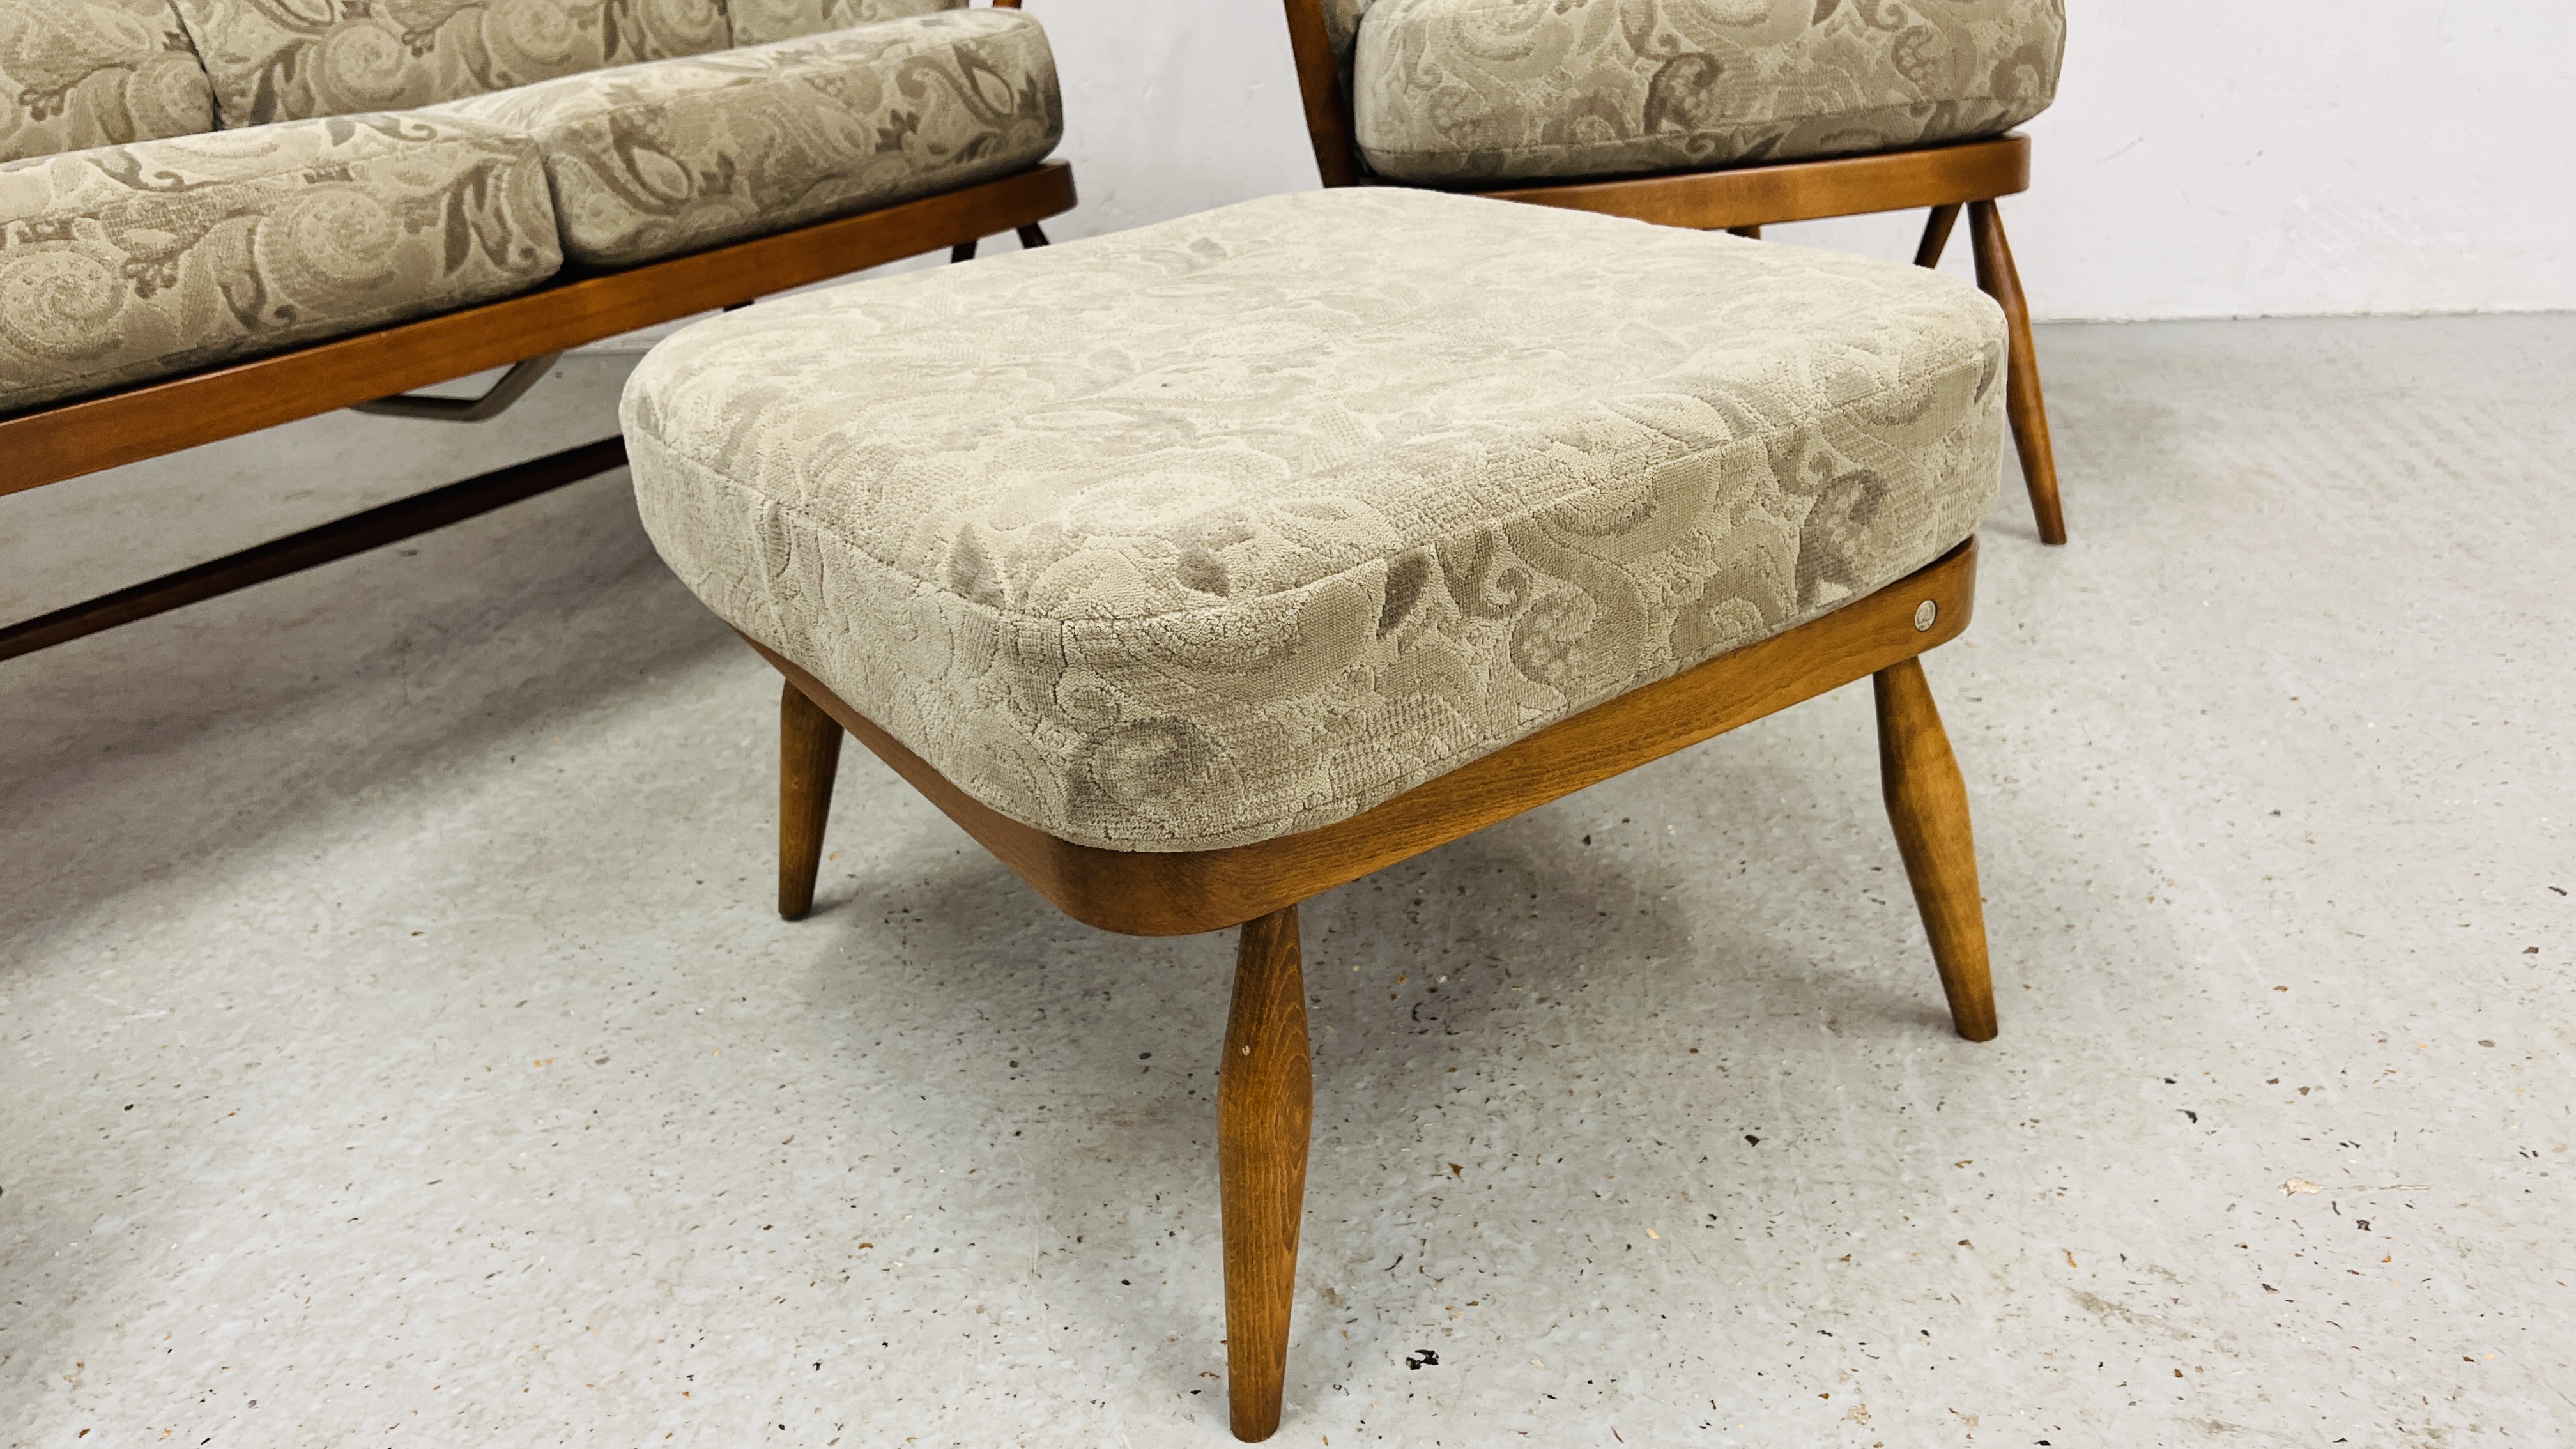 AN ERCOL "GOLDEN DAWN" FINISH COTTAGE THREE PIECE LOUNGE SUITE WITH MATCHING FOOTSTOOL - TRADE ONLY. - Image 10 of 11